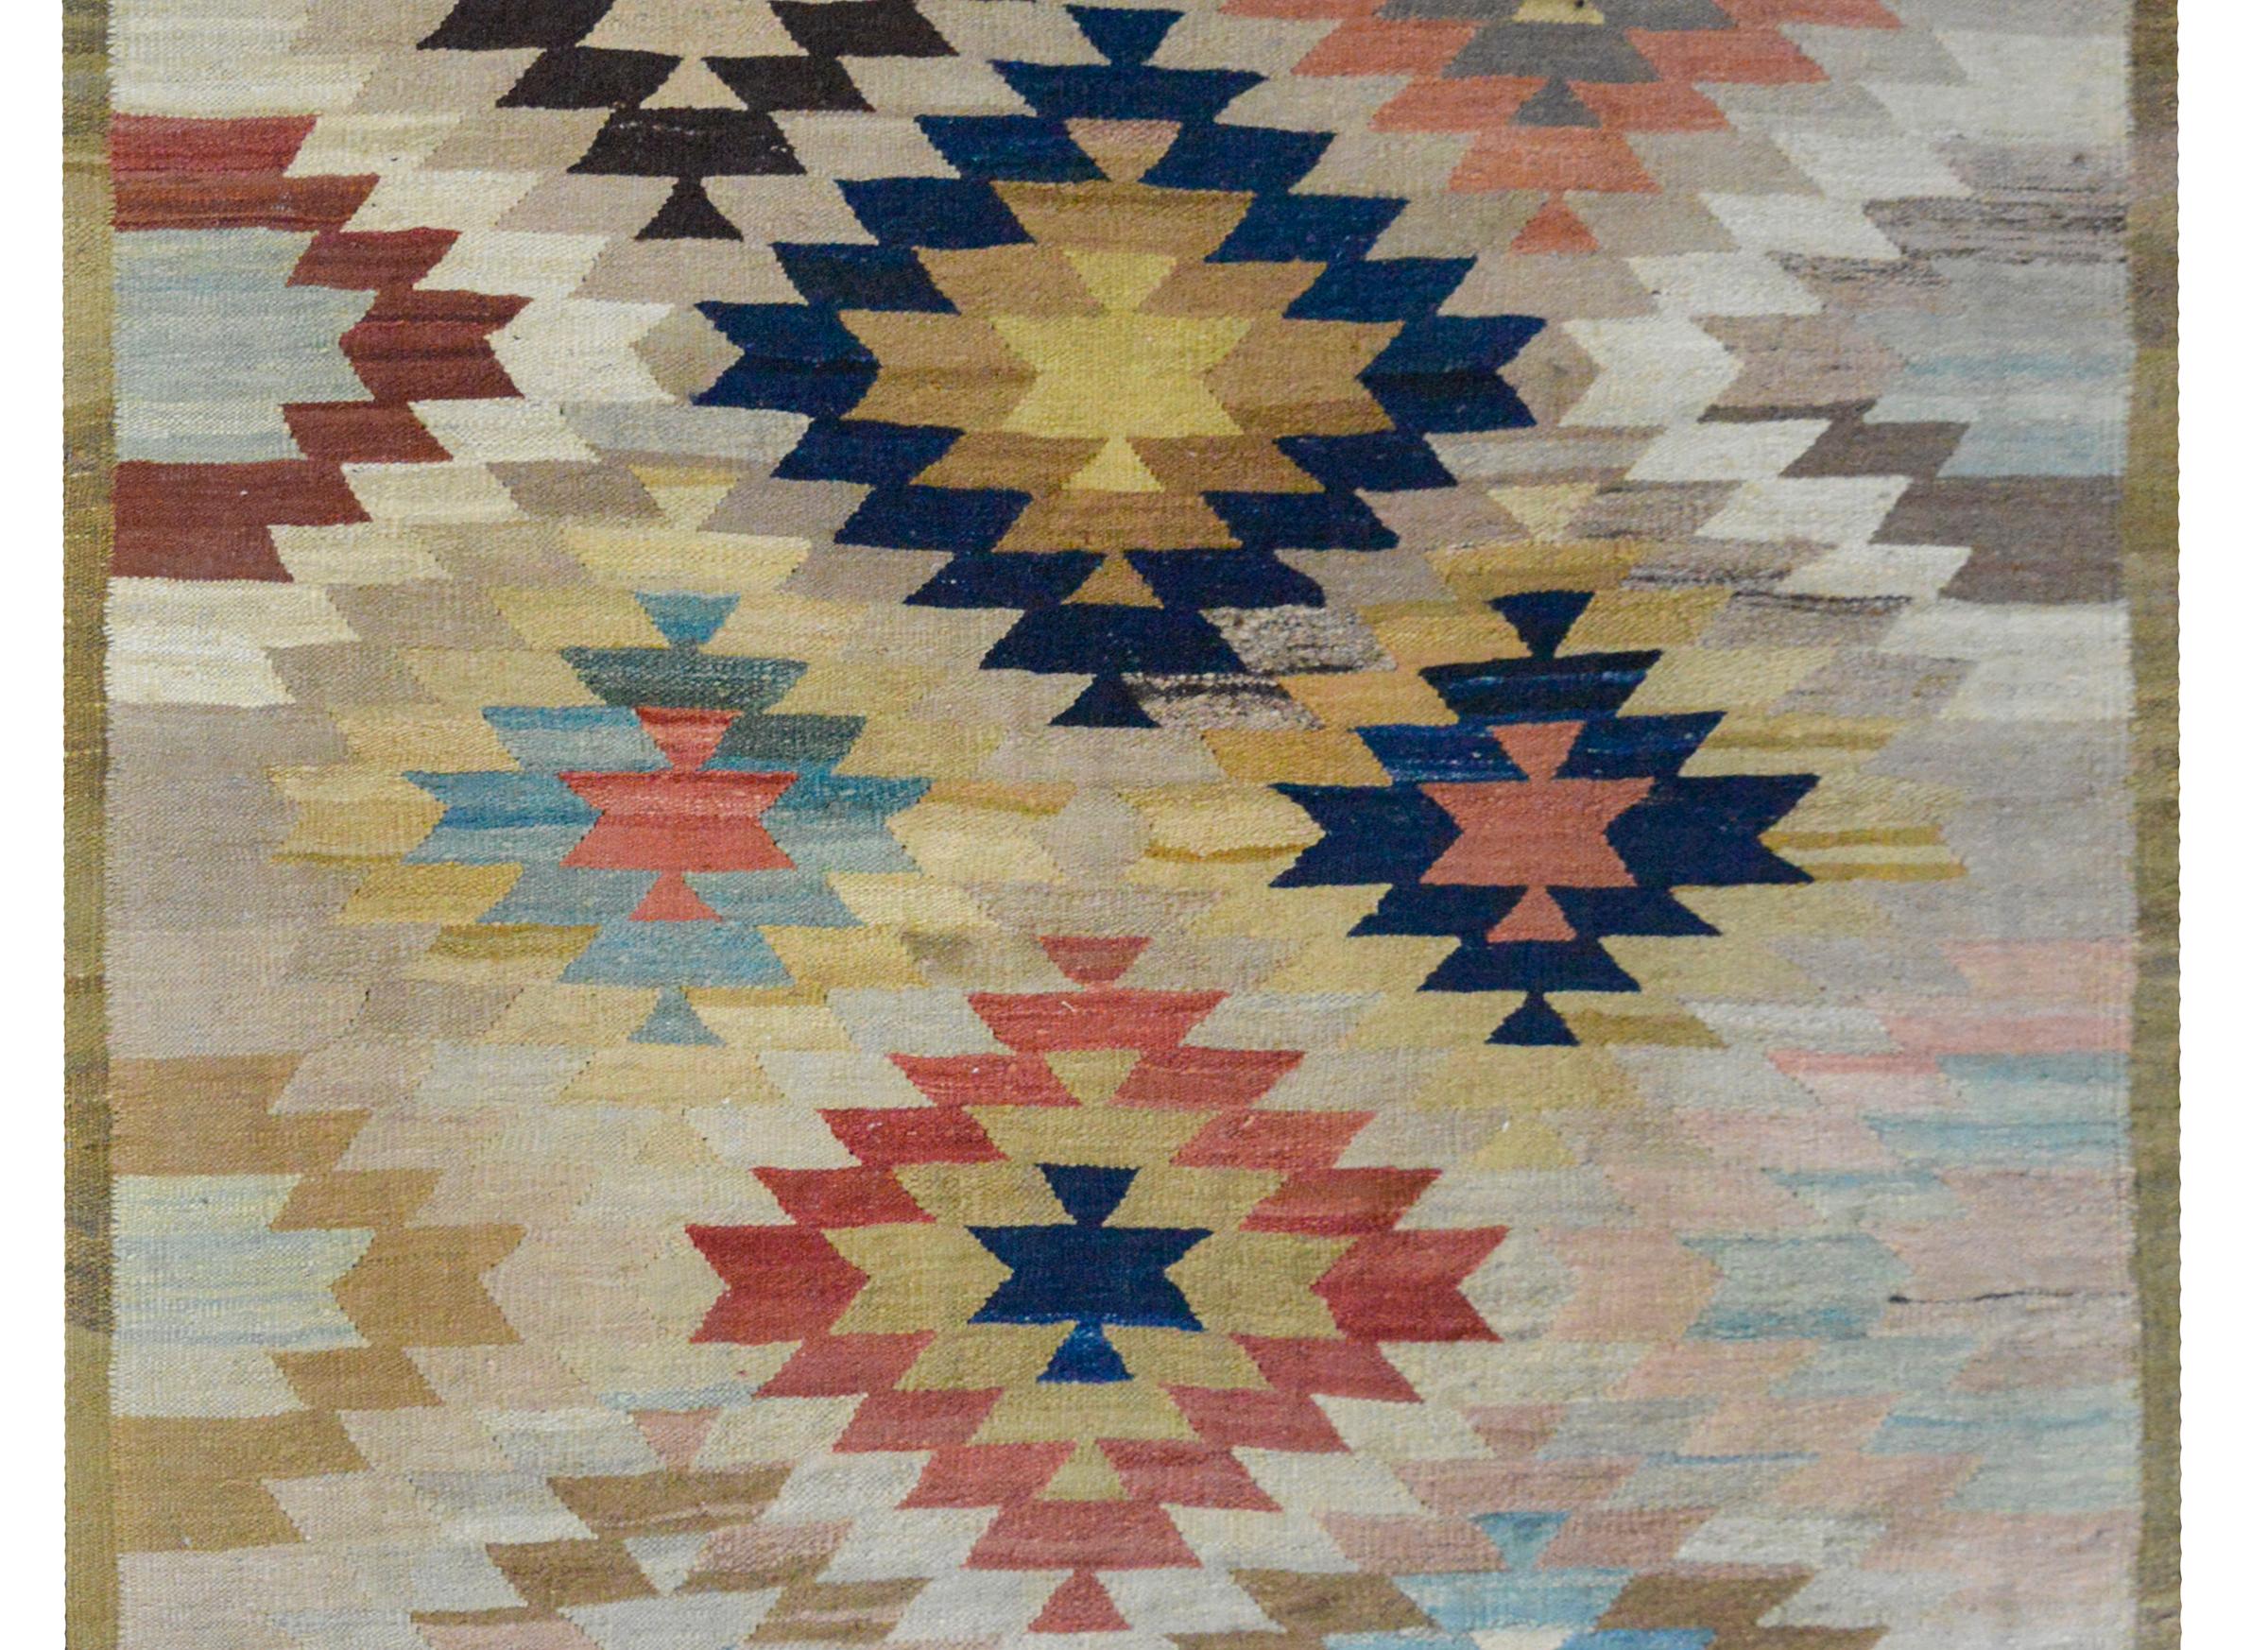 A wonderful and bold late 20th century Afghani Kilim rug with a large-scale geometric pattern woven in myriad colors including crimson, gold, pink, gray, white, and dark indigo, and surrounded by a thin striped border.